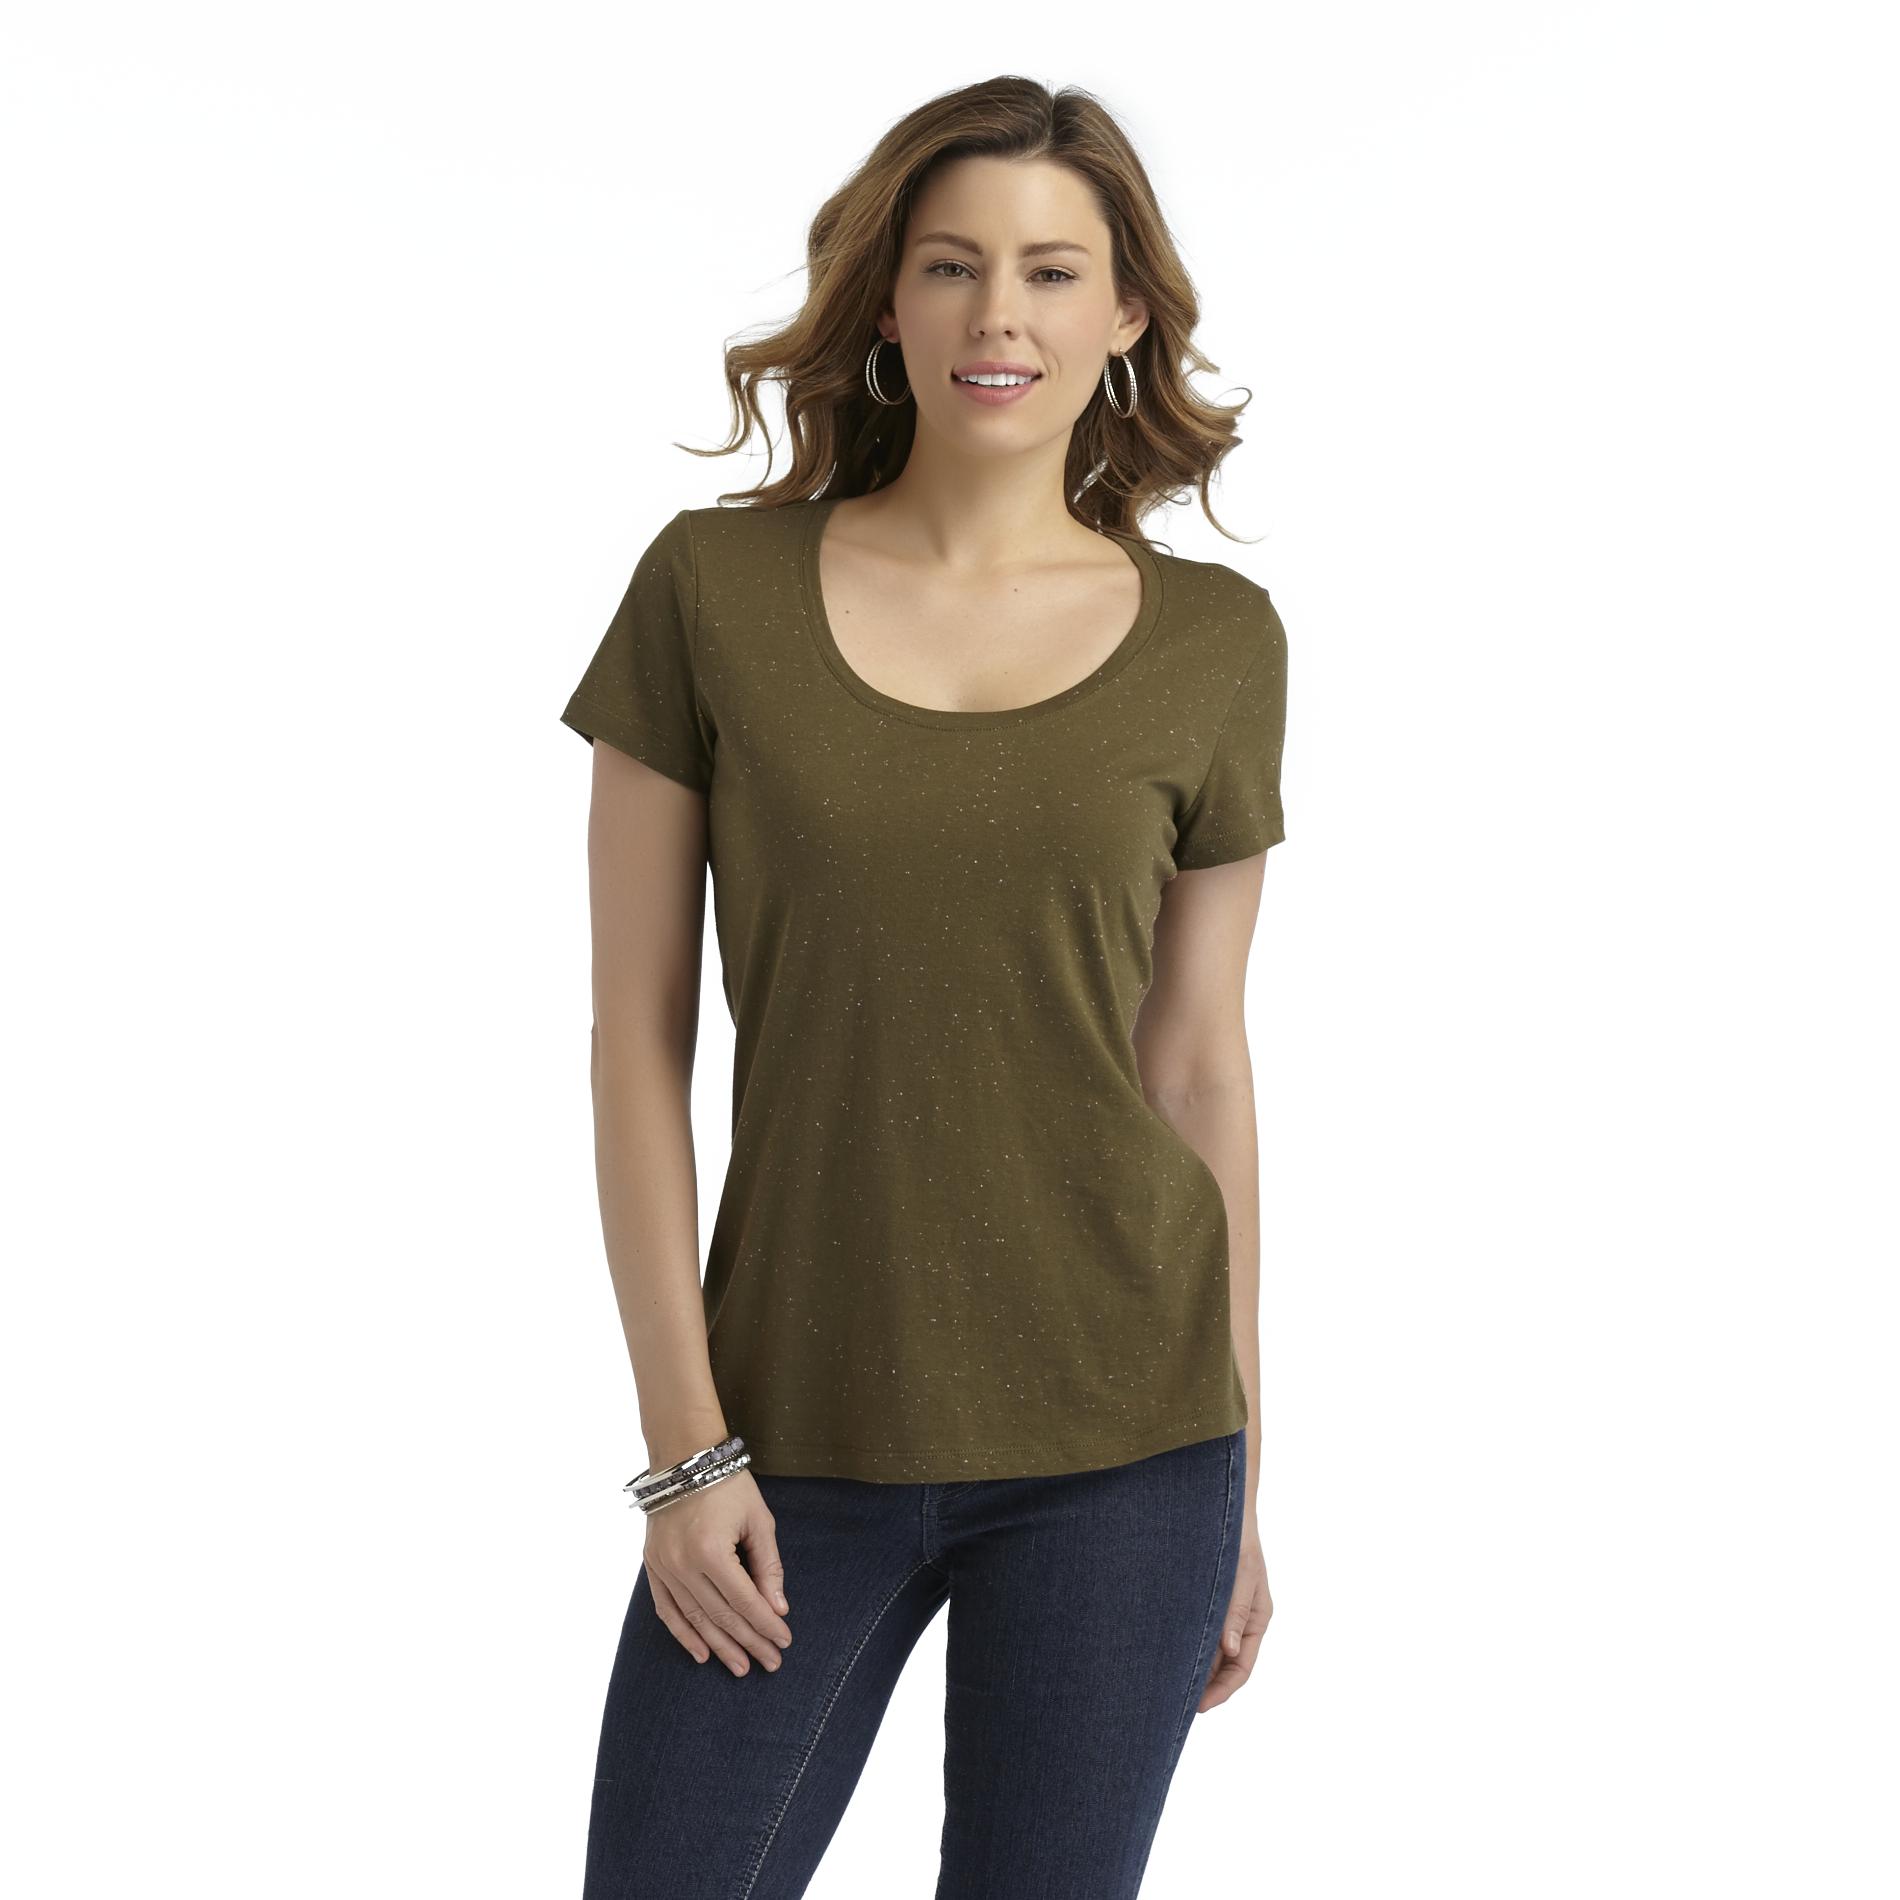 Route 66 Women's Scoop Neck T-Shirt - Speckled